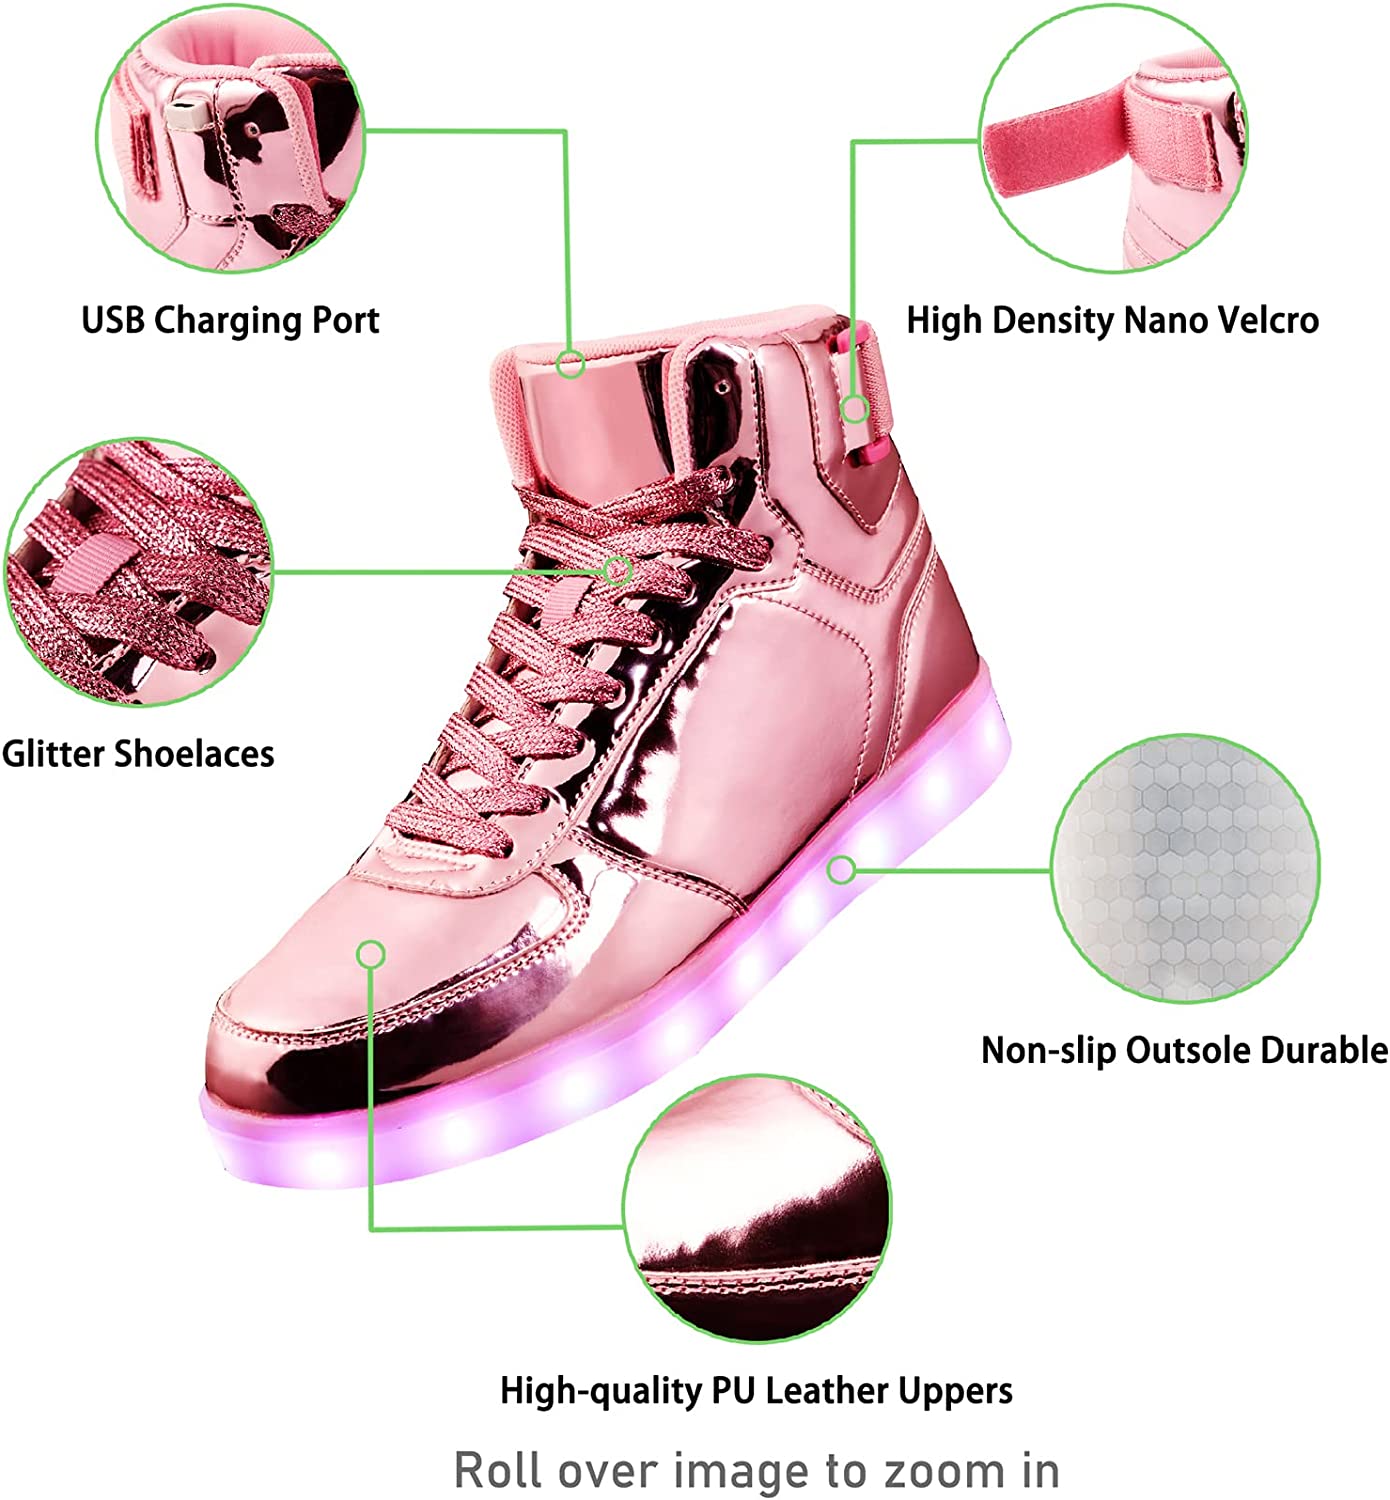 DIYJTS Unisex LED Light Up Shoes, Fashion High Top LED Sneakers USB Rechargeable Glowing Luminous Shoes for Men, Women, Teens